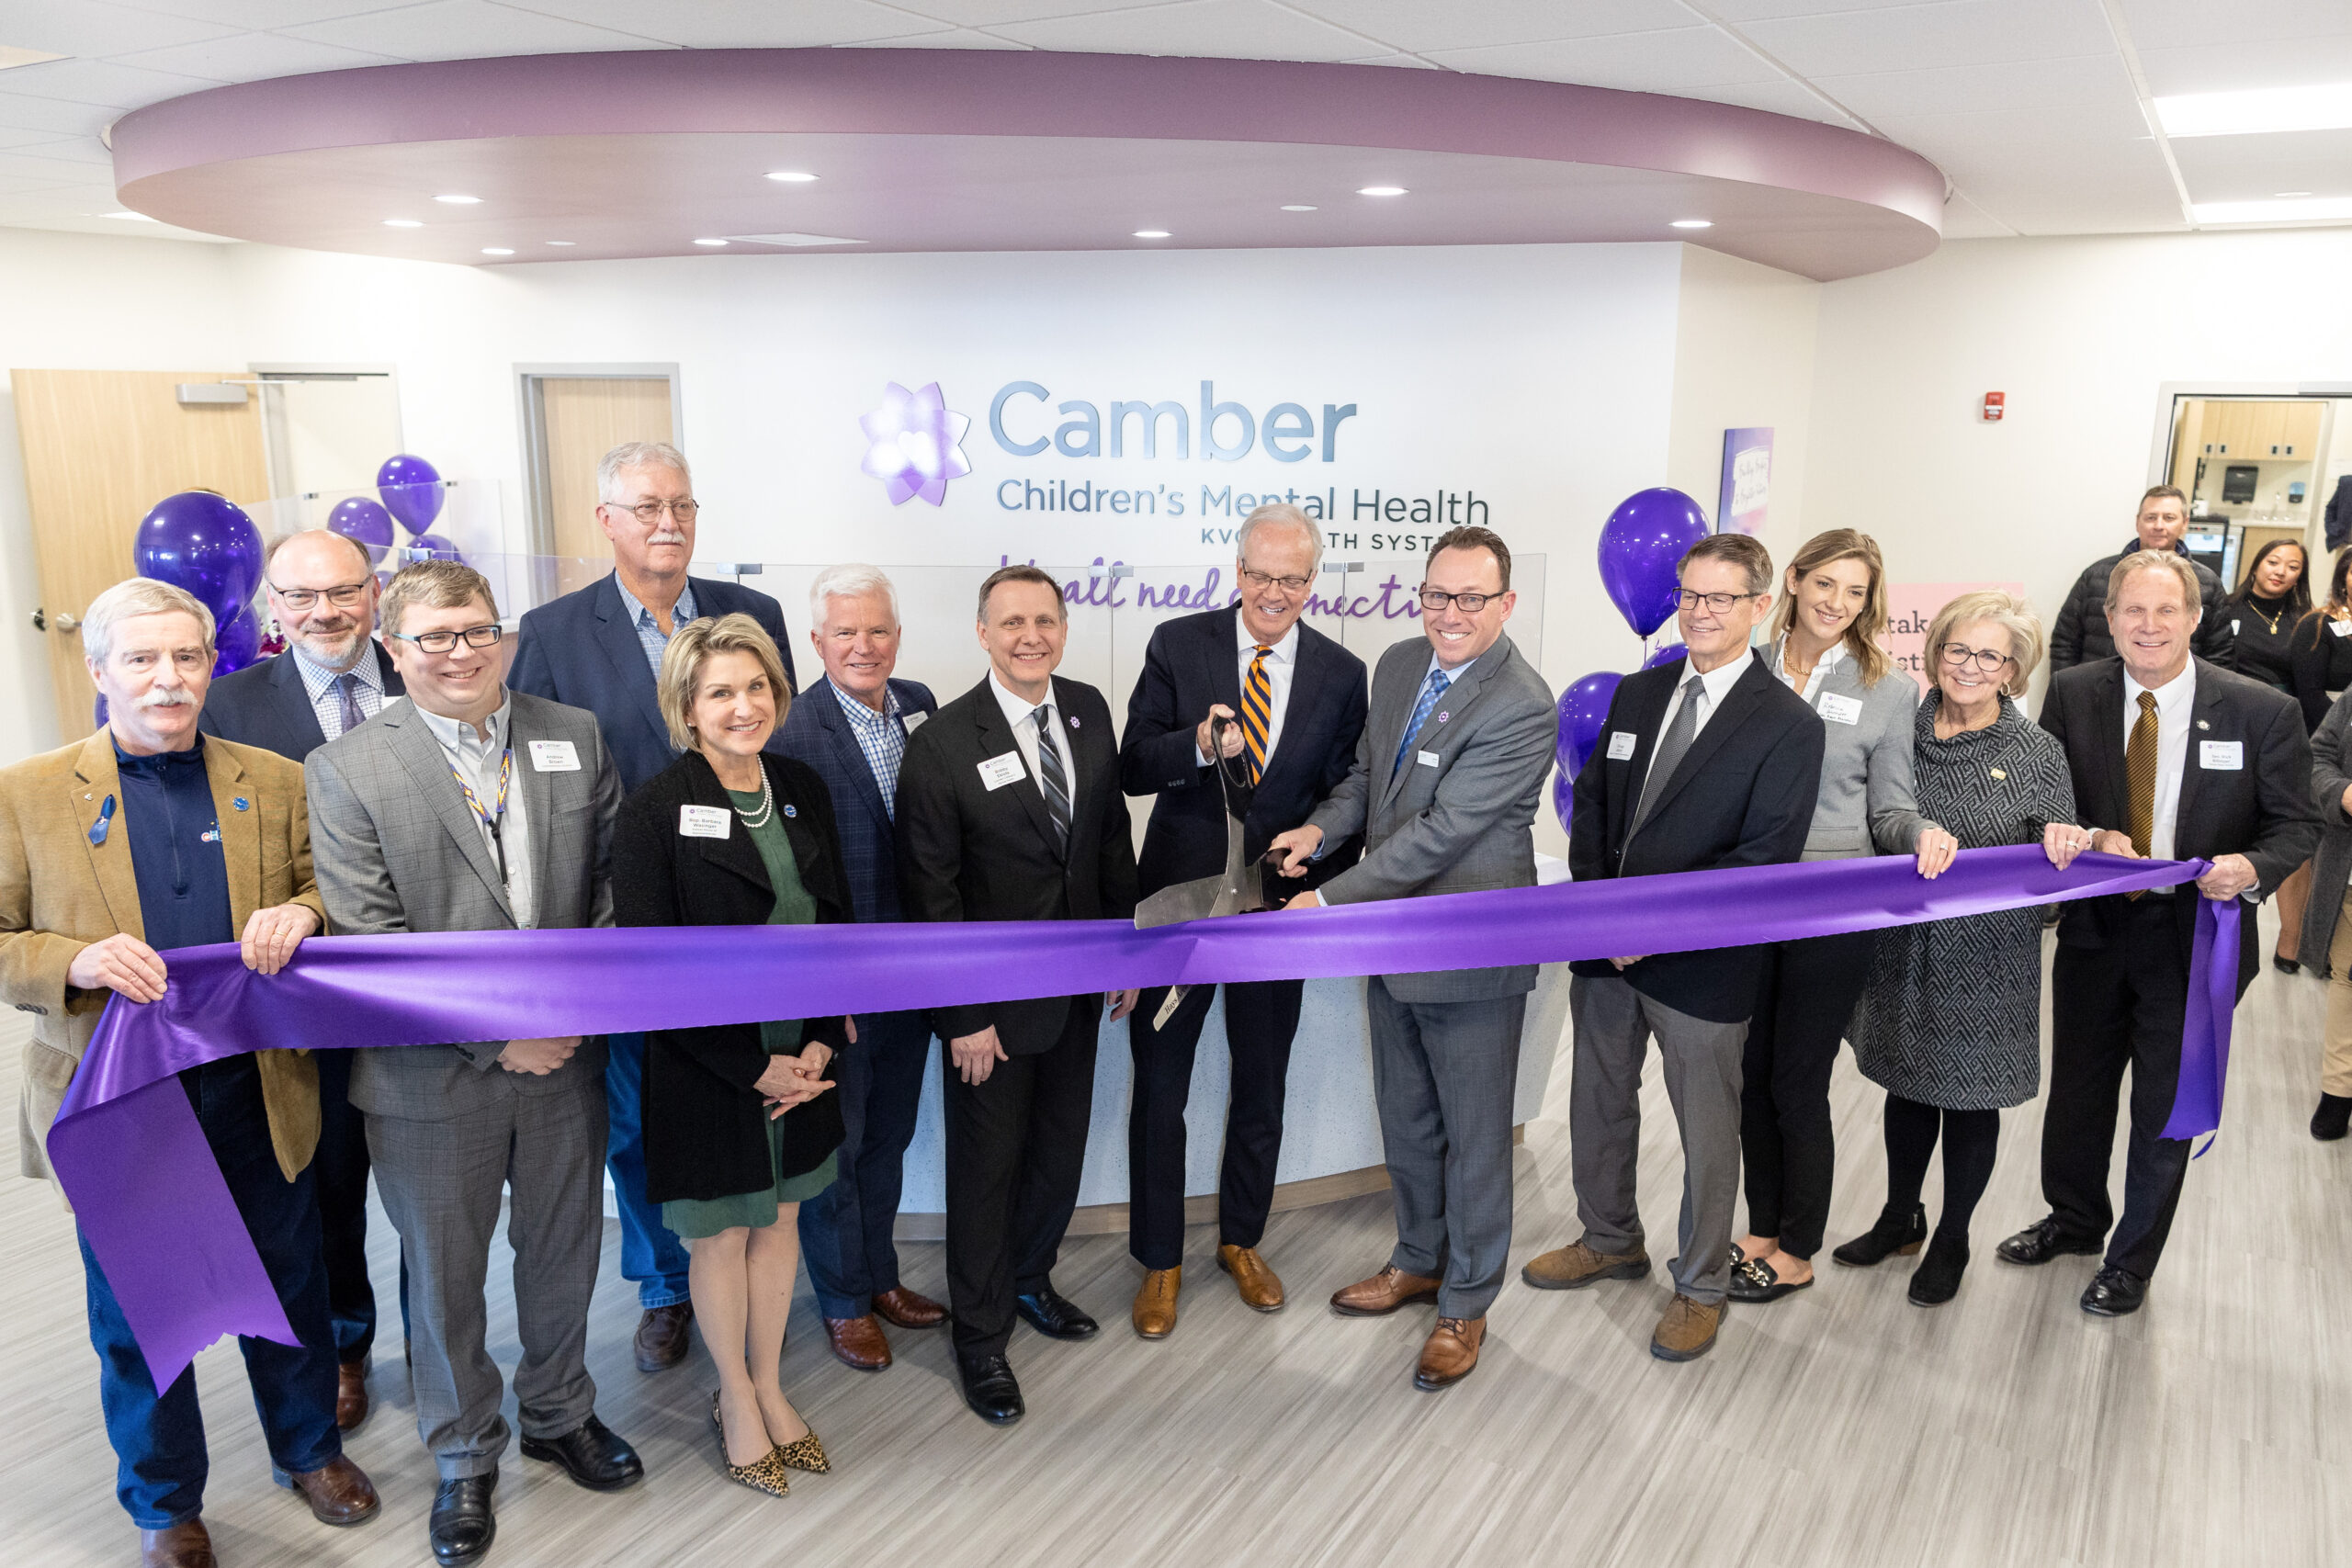 Supporters and officials at the ribbon cutting ceremony of Camber Children's Mental Health in Hays, Kansas, an inpatient psychiatric and residential treatment center for youth